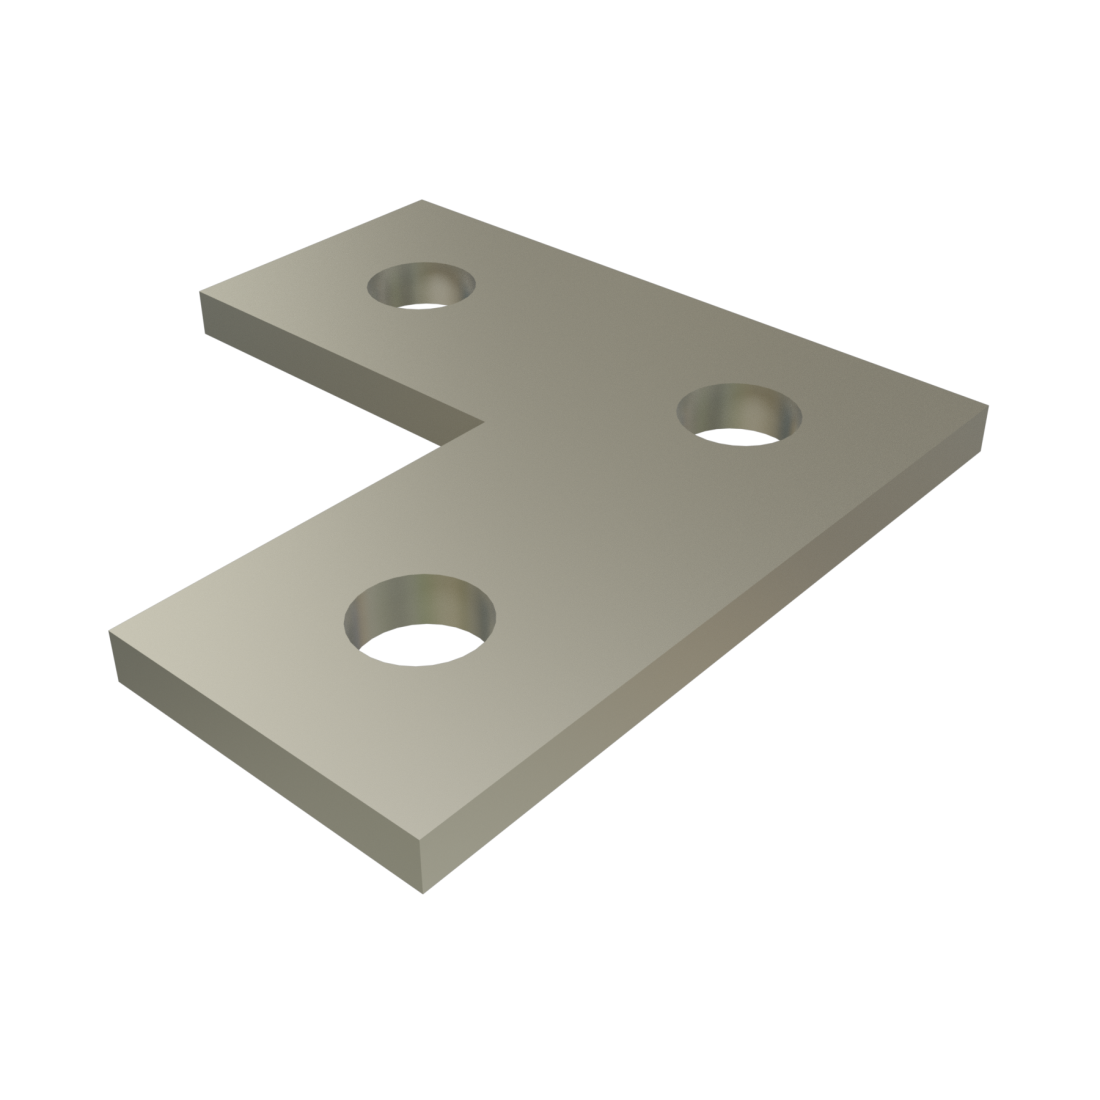 Stainless Steel 3-Hole Plates